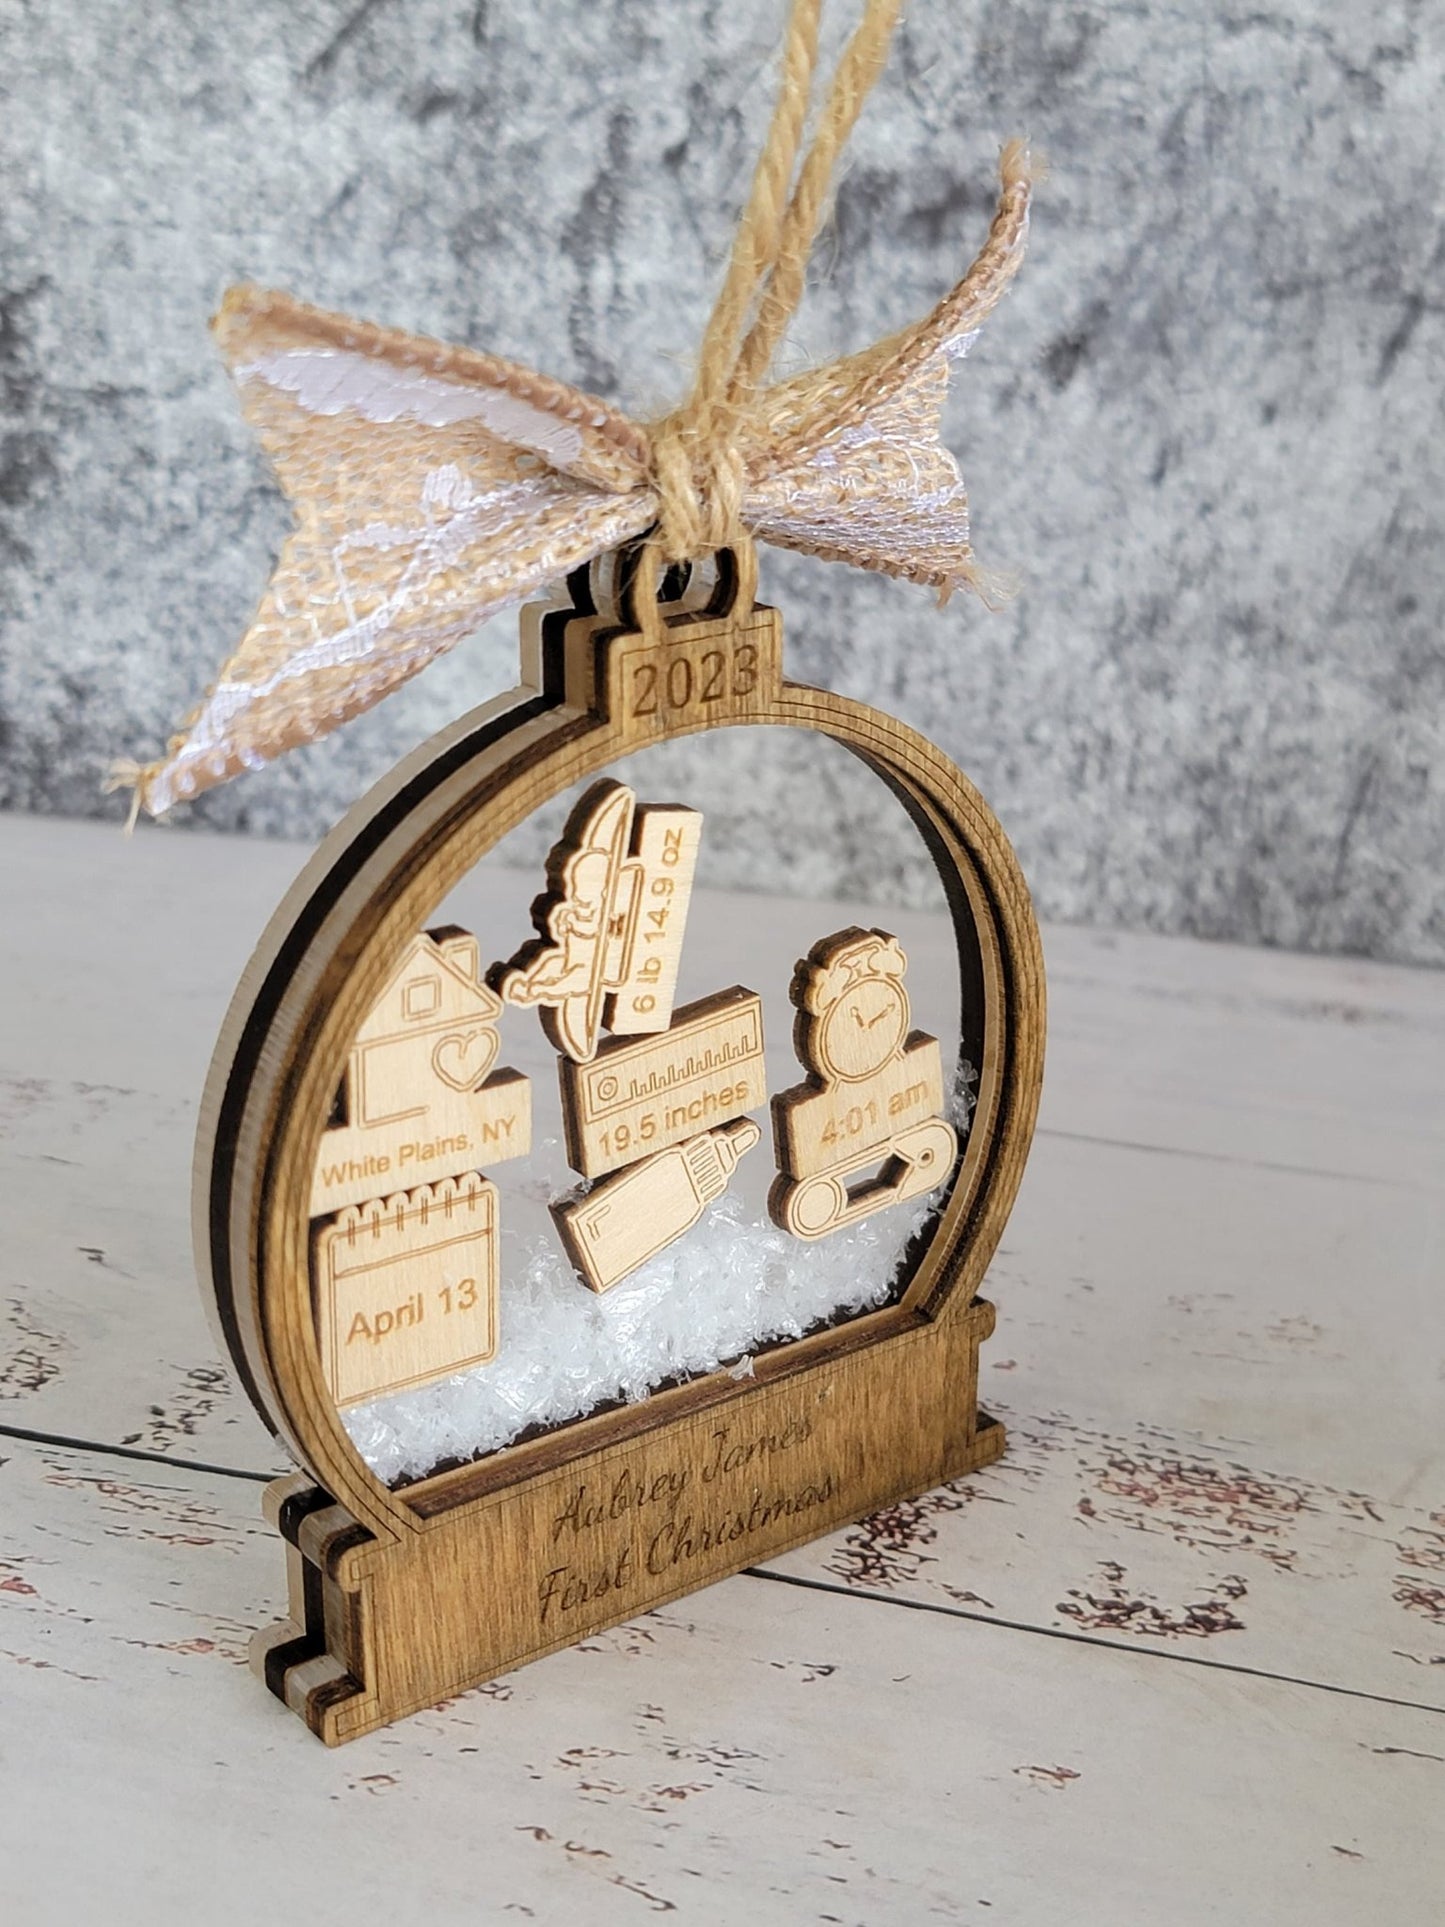 Baby's First Christmas Ornament Snow Globe Edition - EverLee Creations